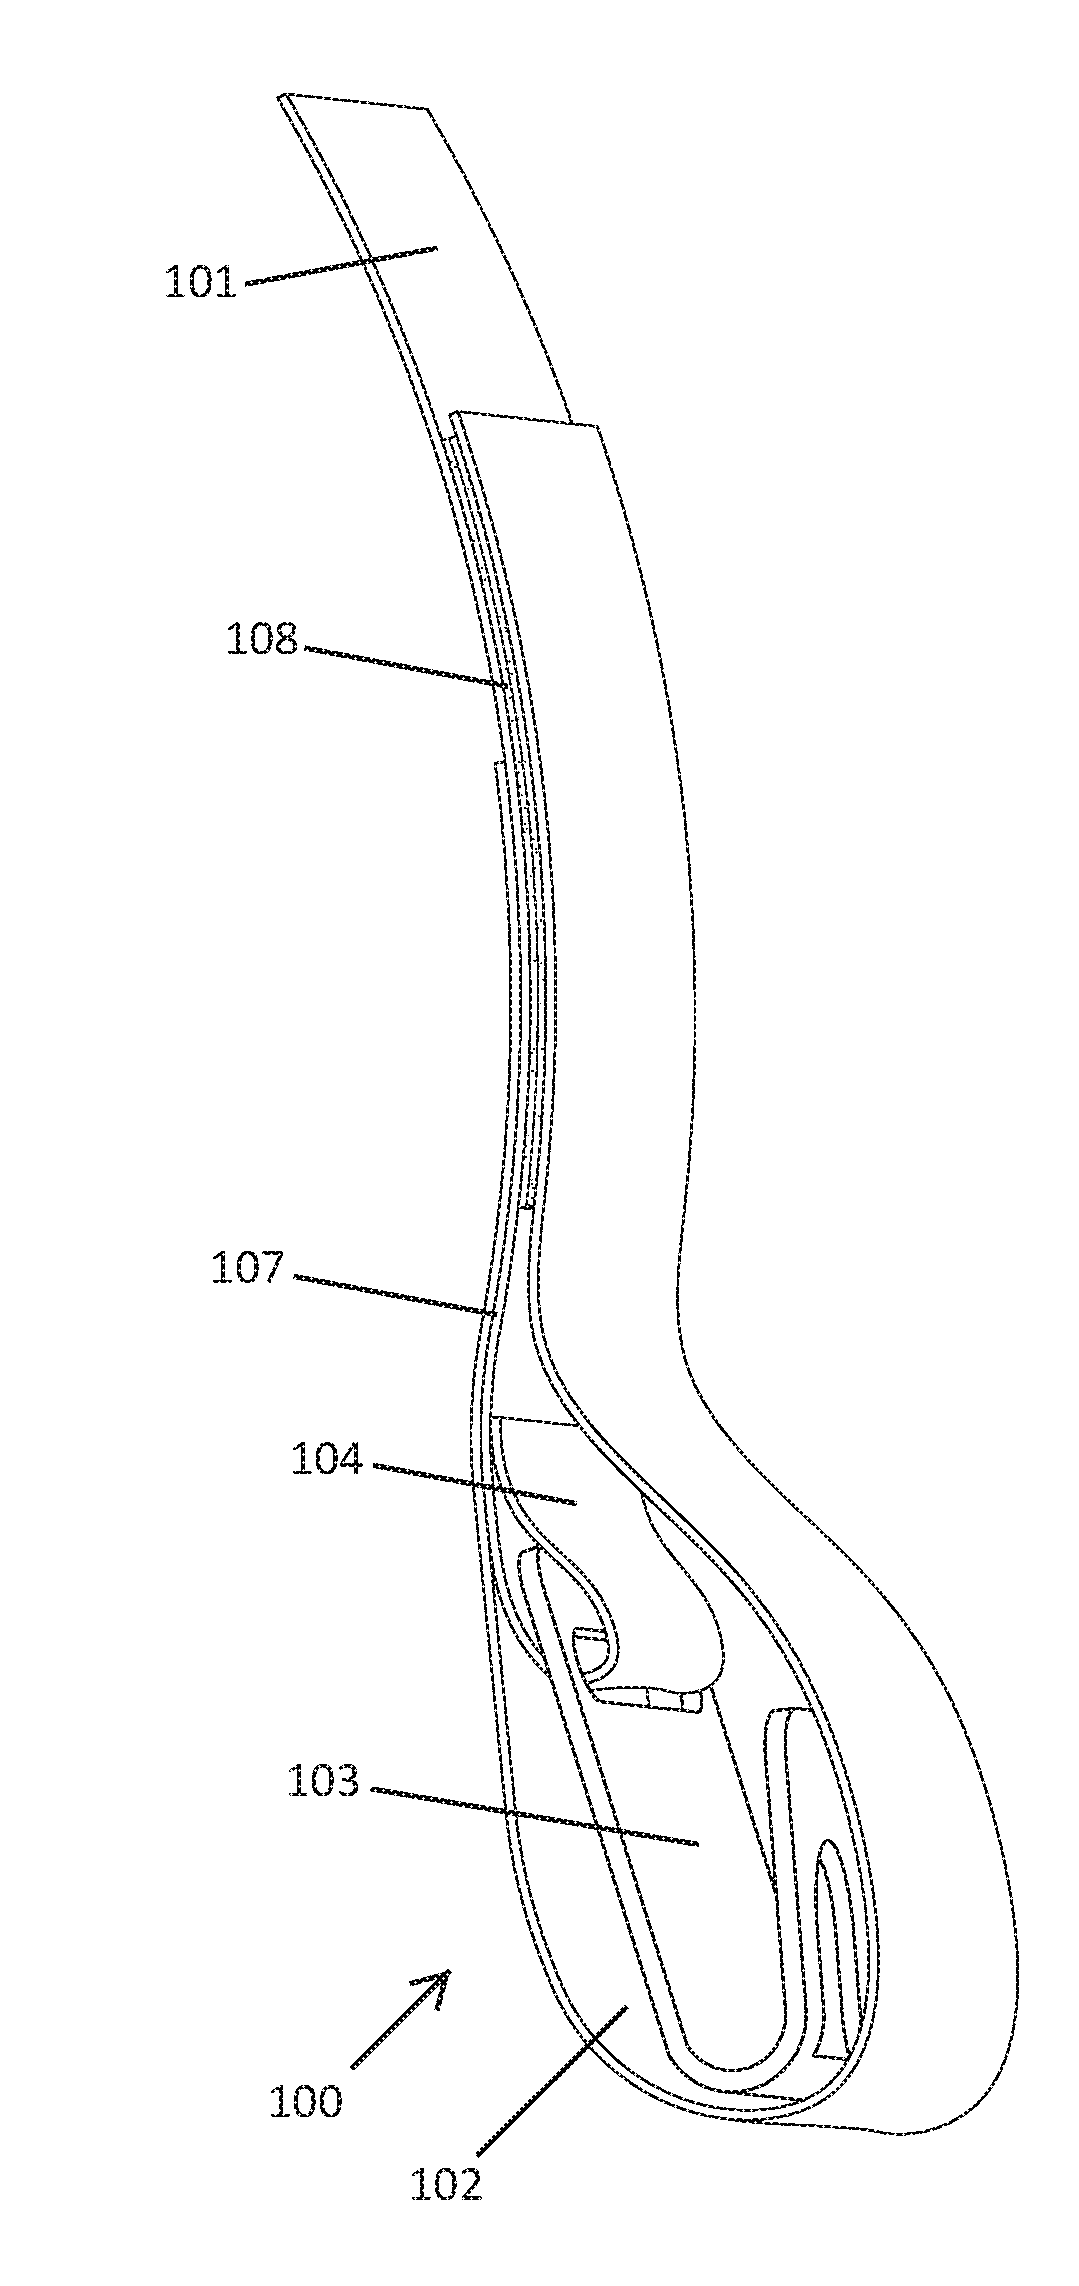 Tie Down Strap with Strap Loop for Preventing Disengagement while Securing Cargo